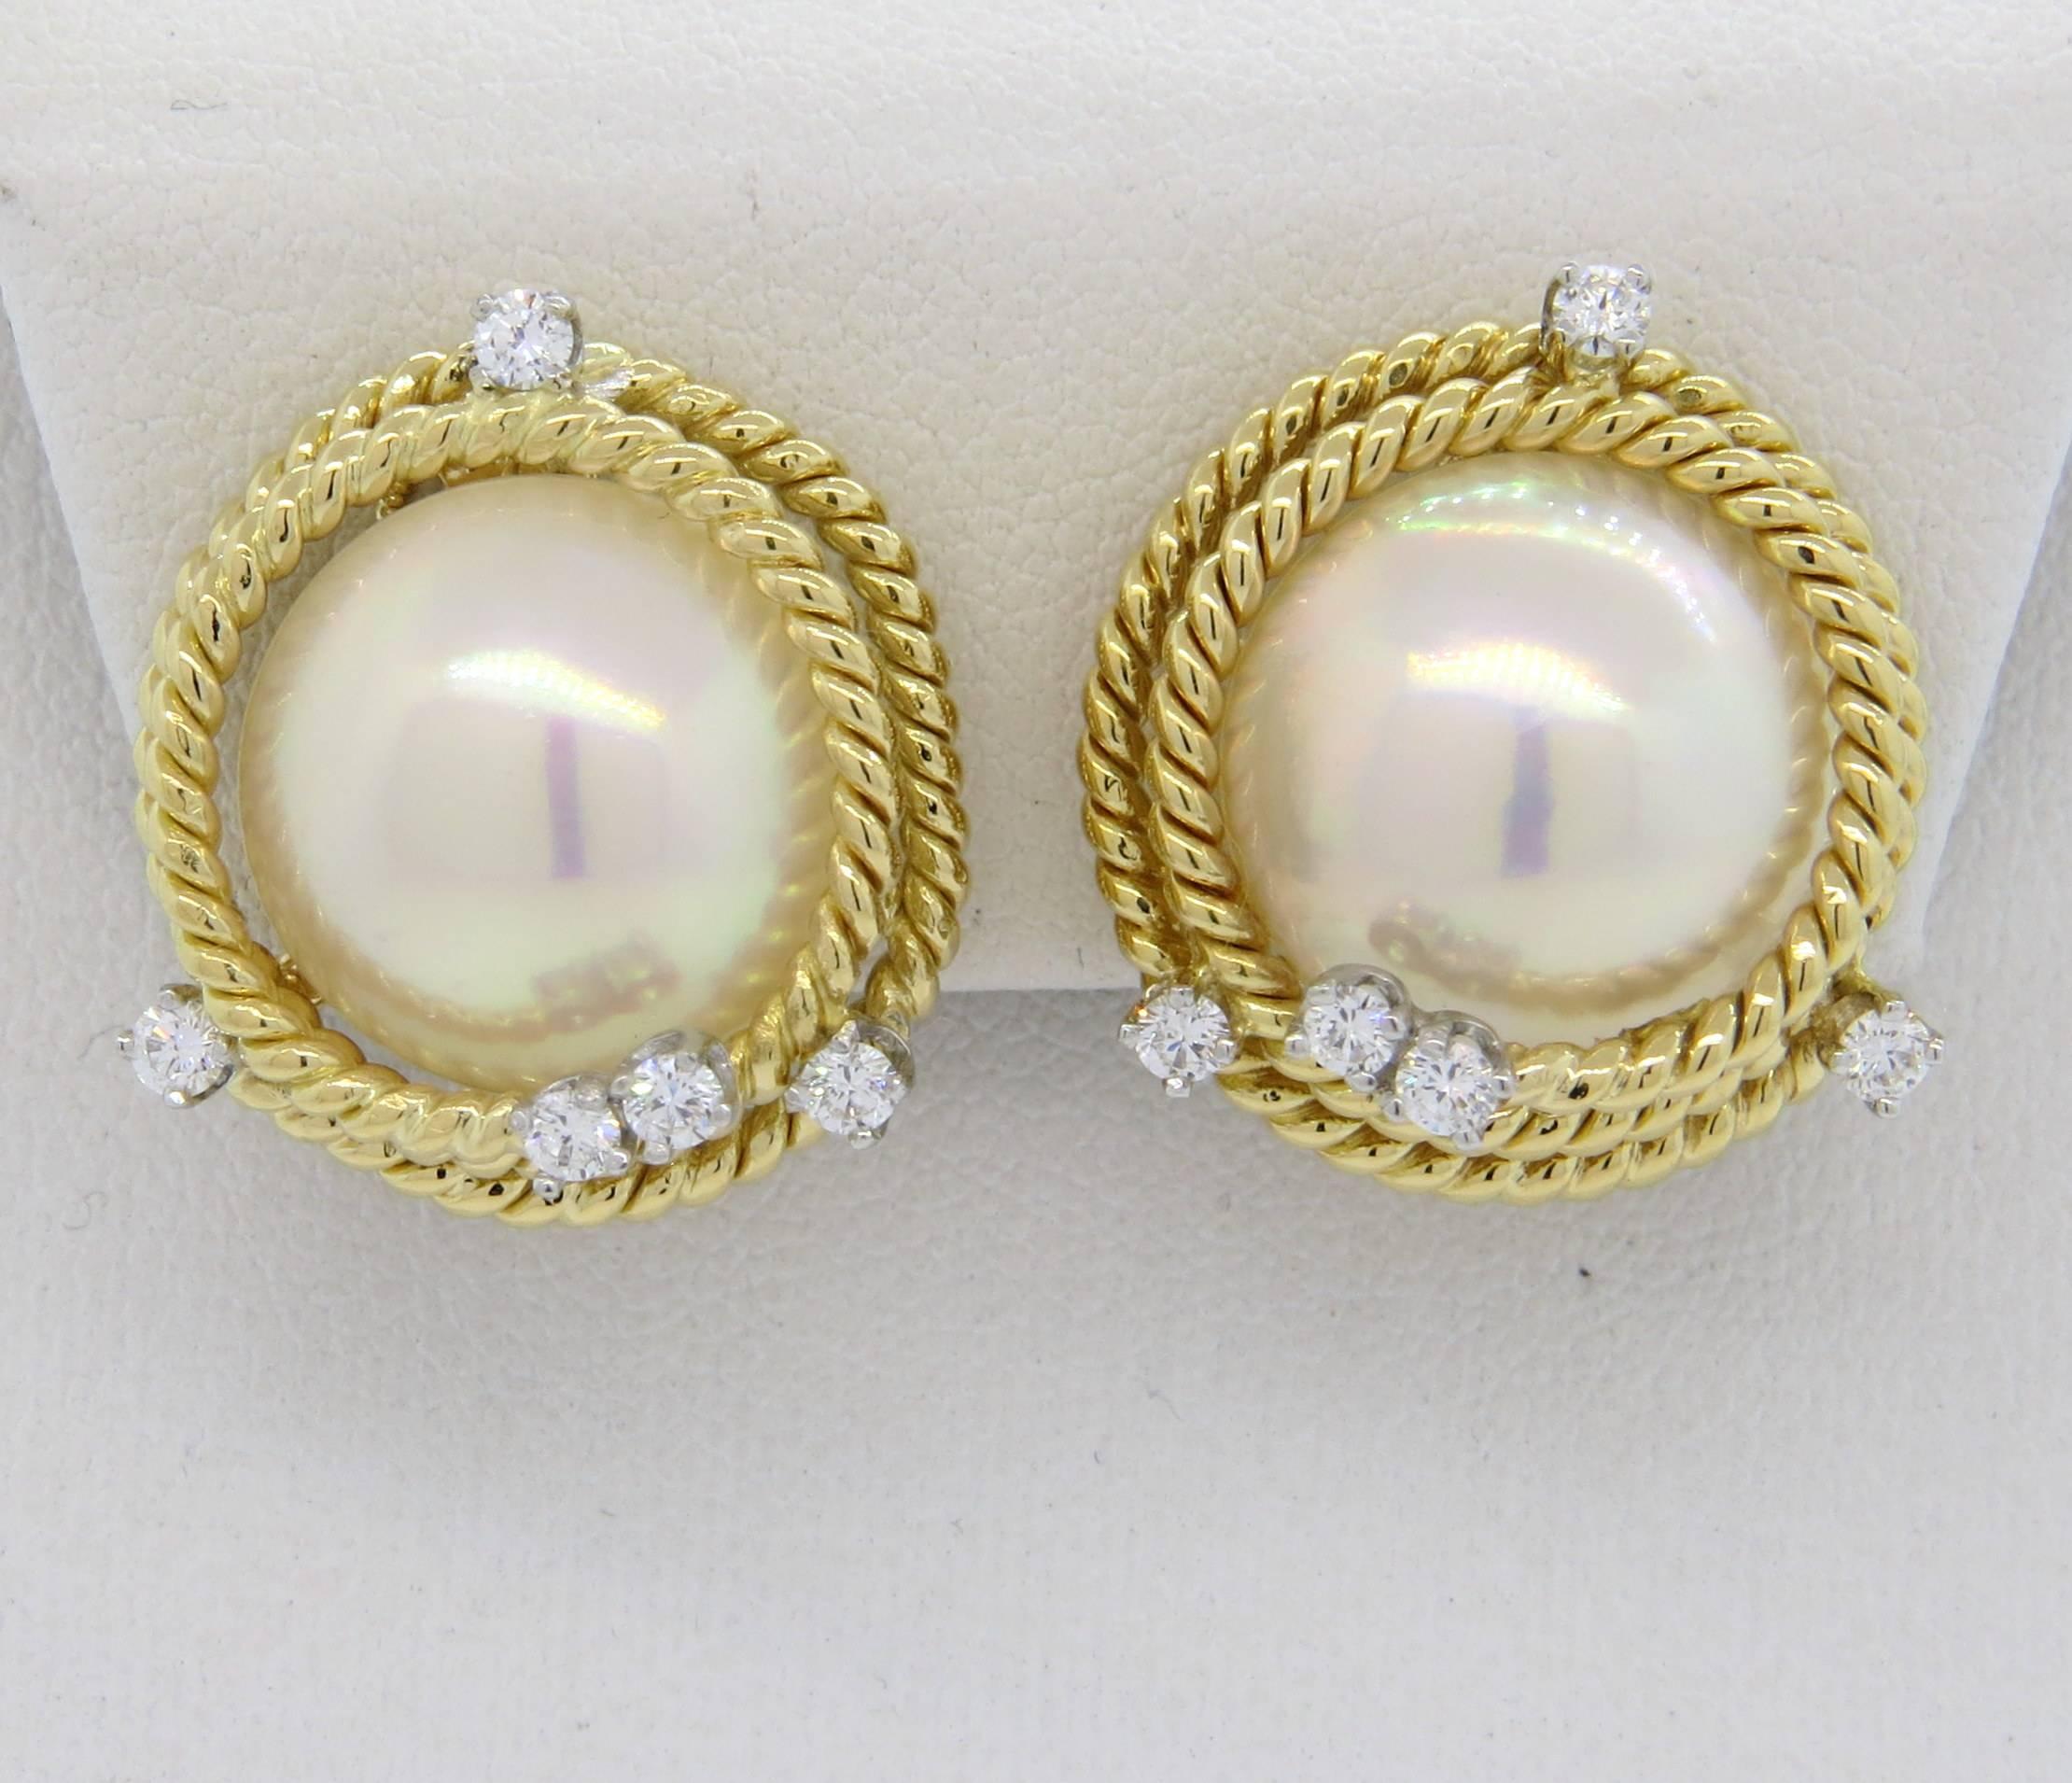 A pair of 18k yellow gold earrings, crafted by Jean Schlumberger for Tiffany & Co,  featuring signature rope design, decorated with 14.7mm mabe pearls in the center and 0.52ctw in G/VS diamonds around. Earrings are 21mm x 23mm, Marked:  Tiffany &